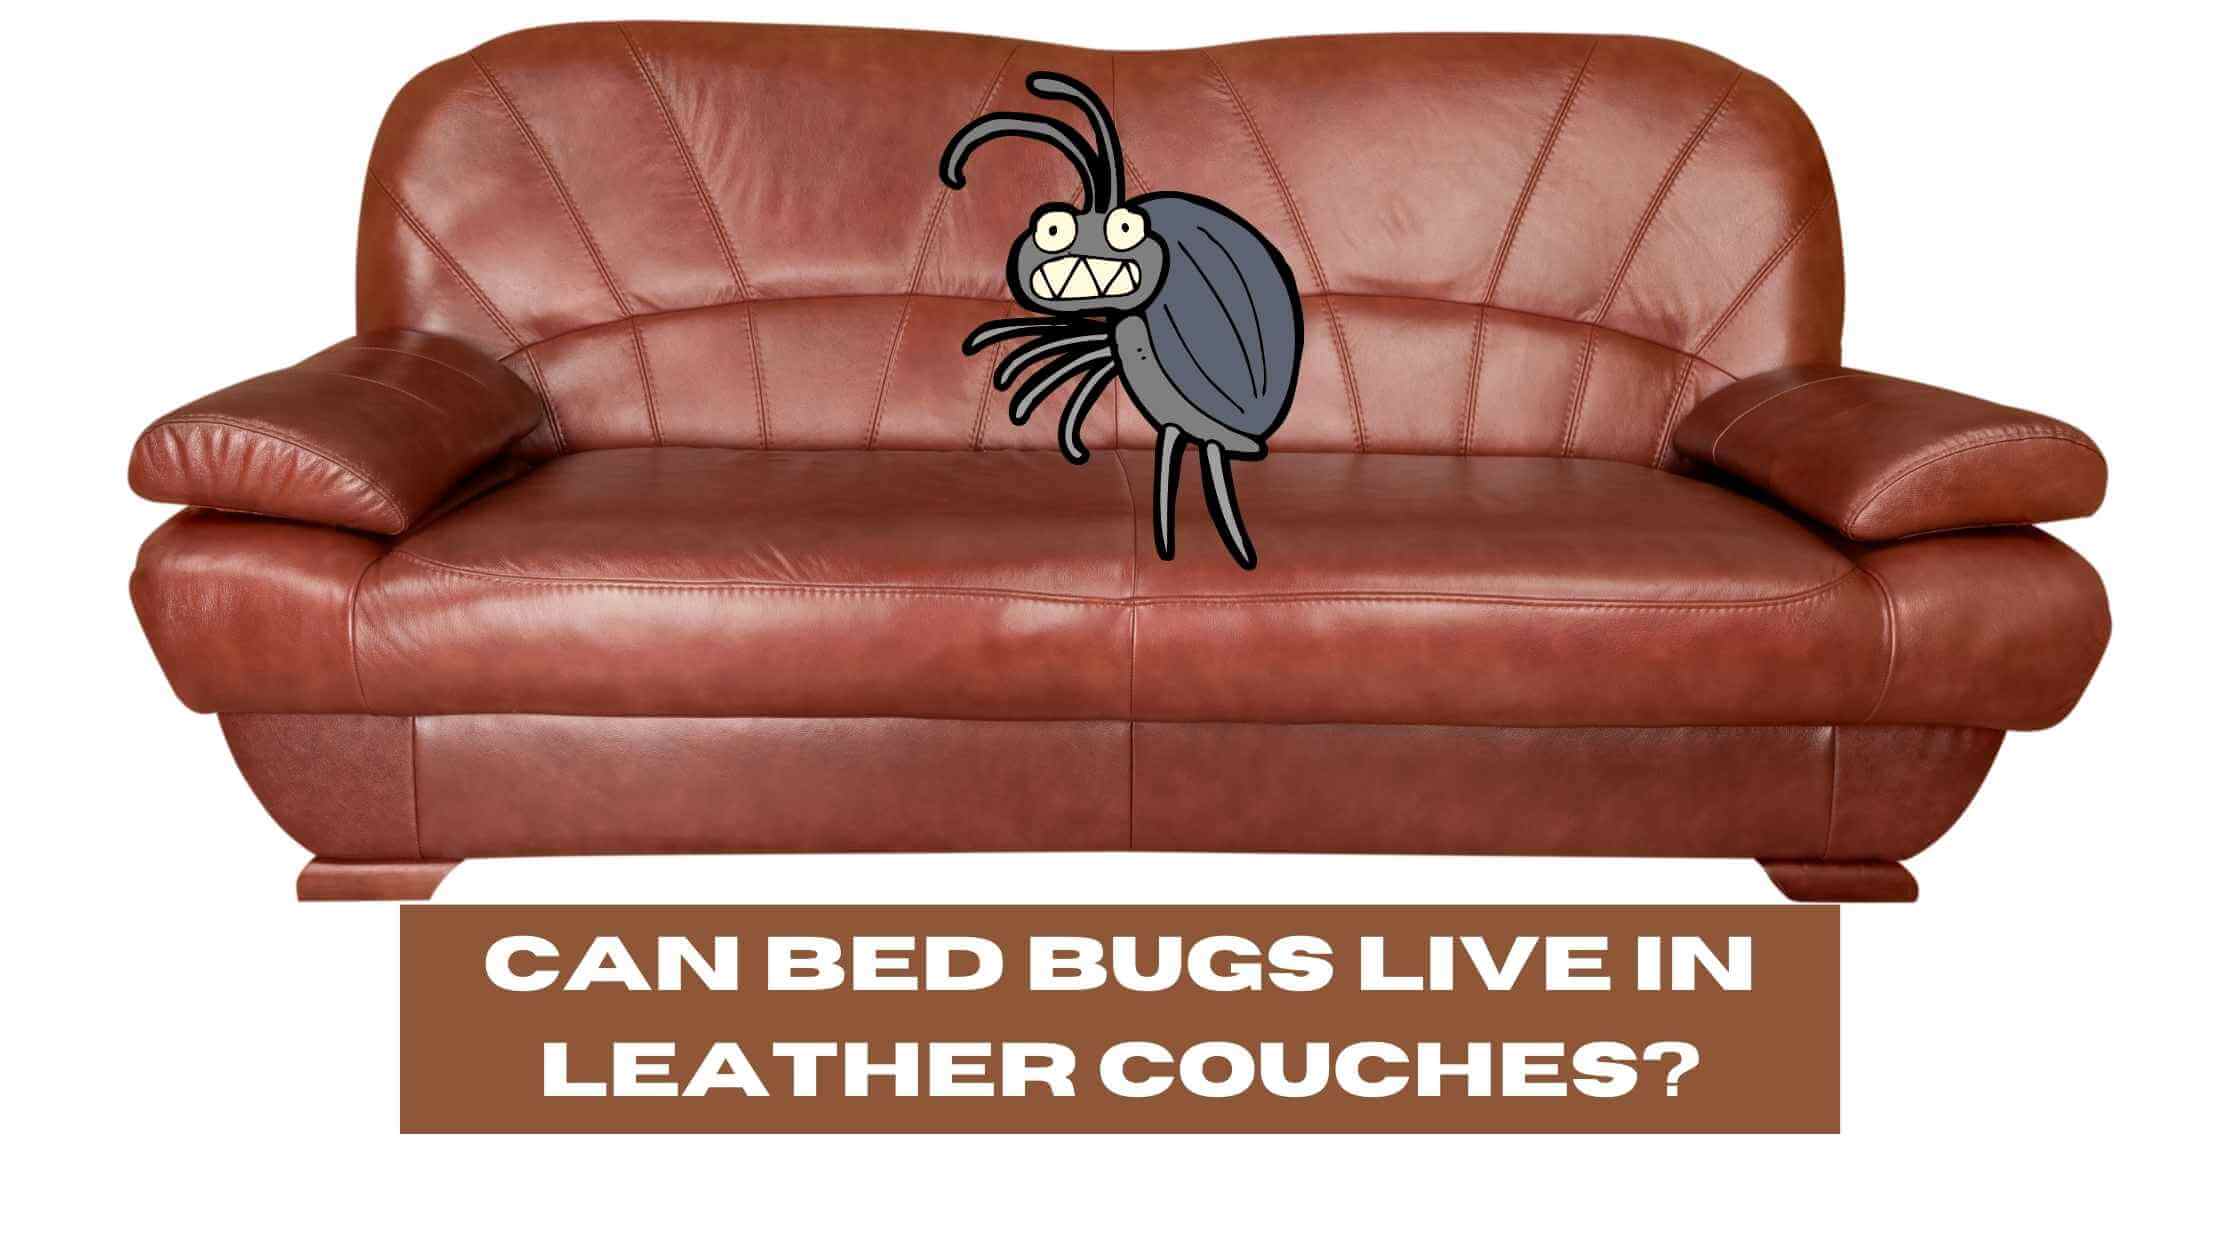 Can Bed Bugs Live in Leather Couches